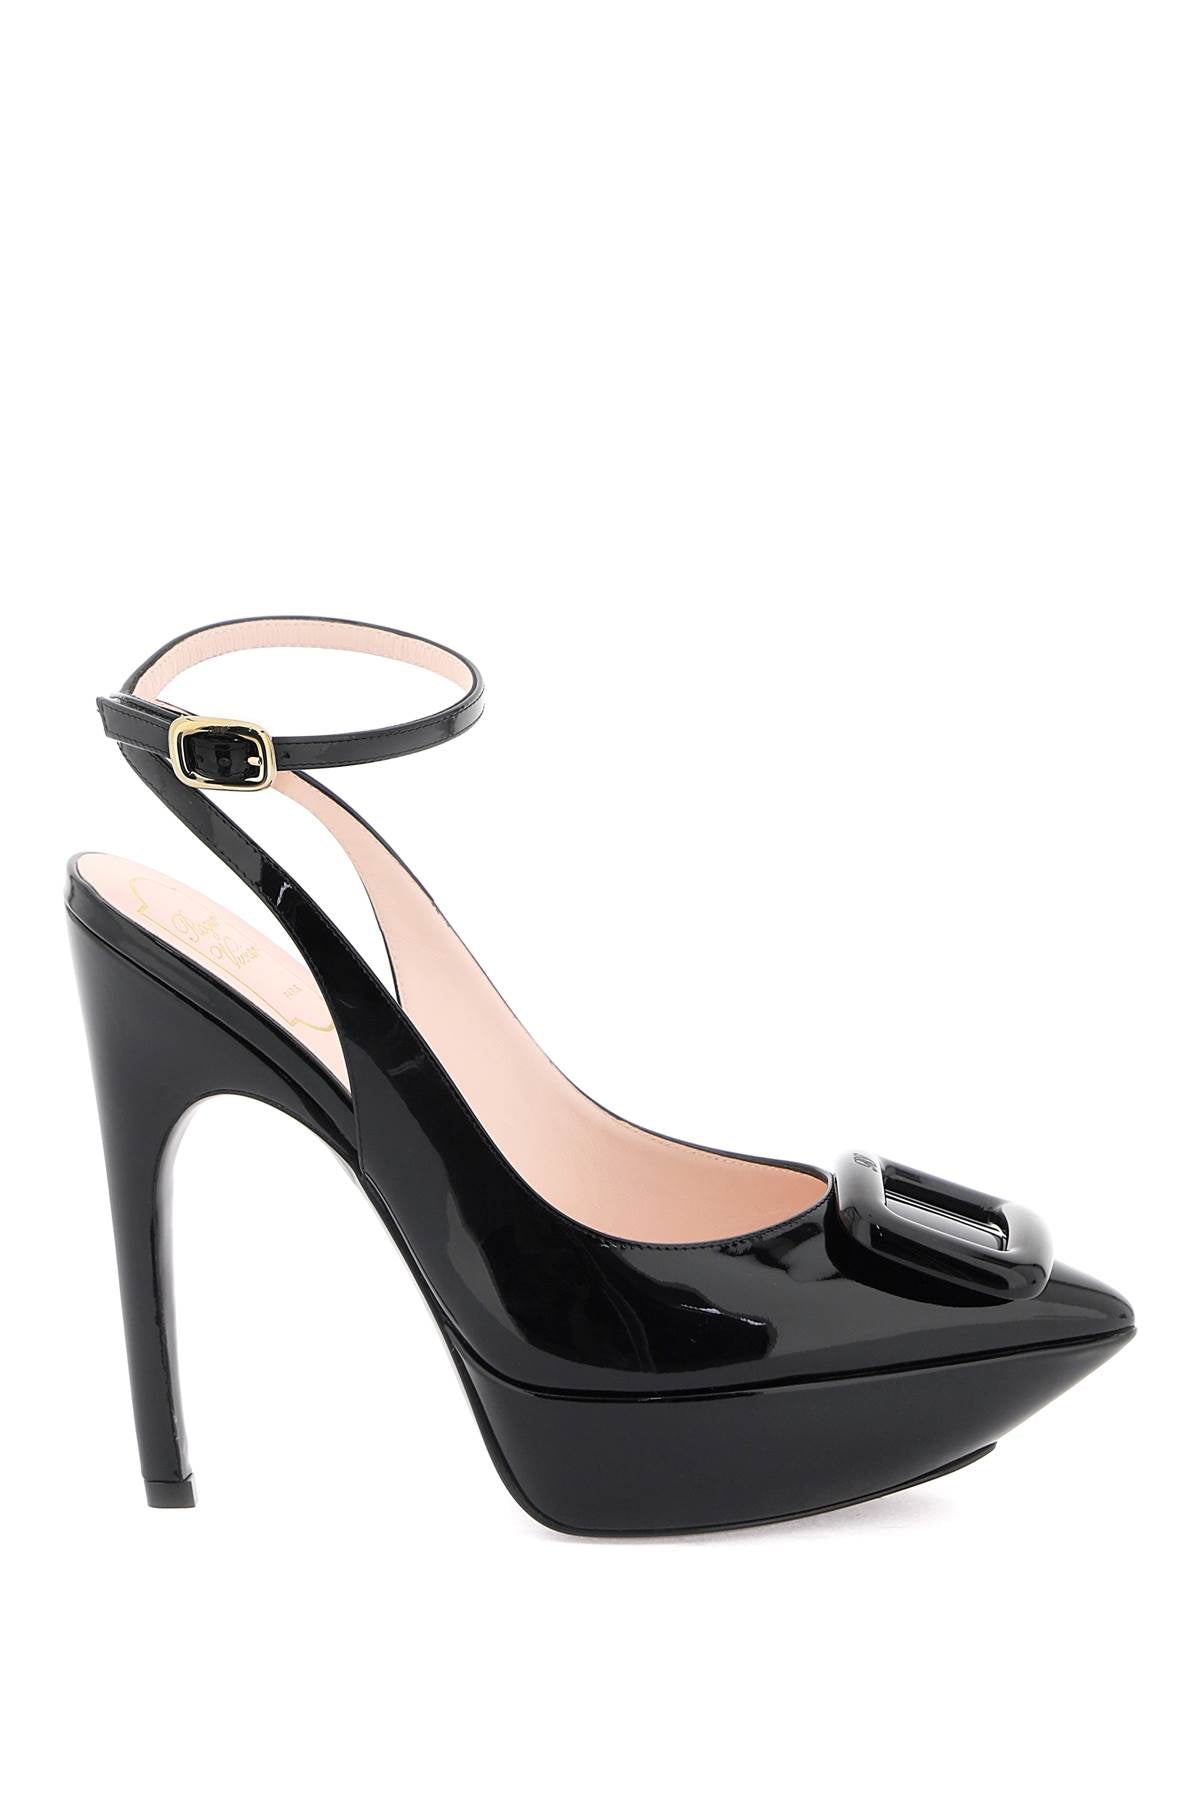 Stylish and Elegant Patent Leather Slingback Pumps for Women